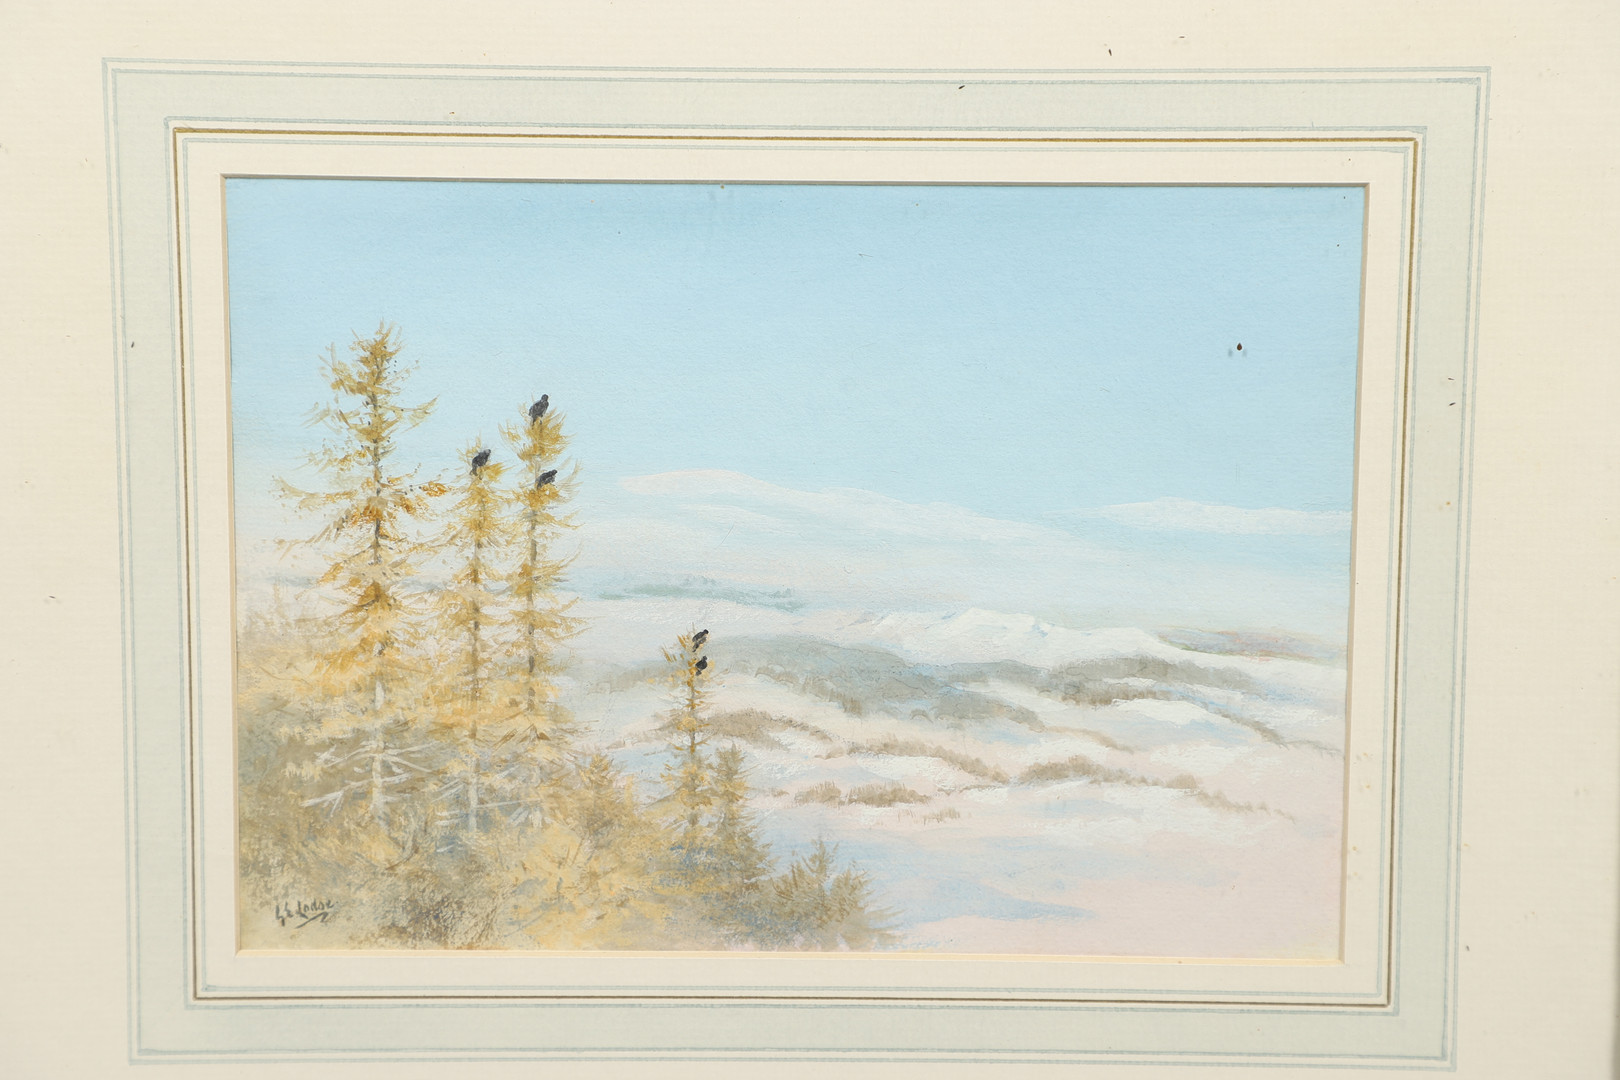 GEORGE EDWARD LODGE (1860-1954). BLACKGAME IN FIR TREES, WINTER. (d) - Image 3 of 7